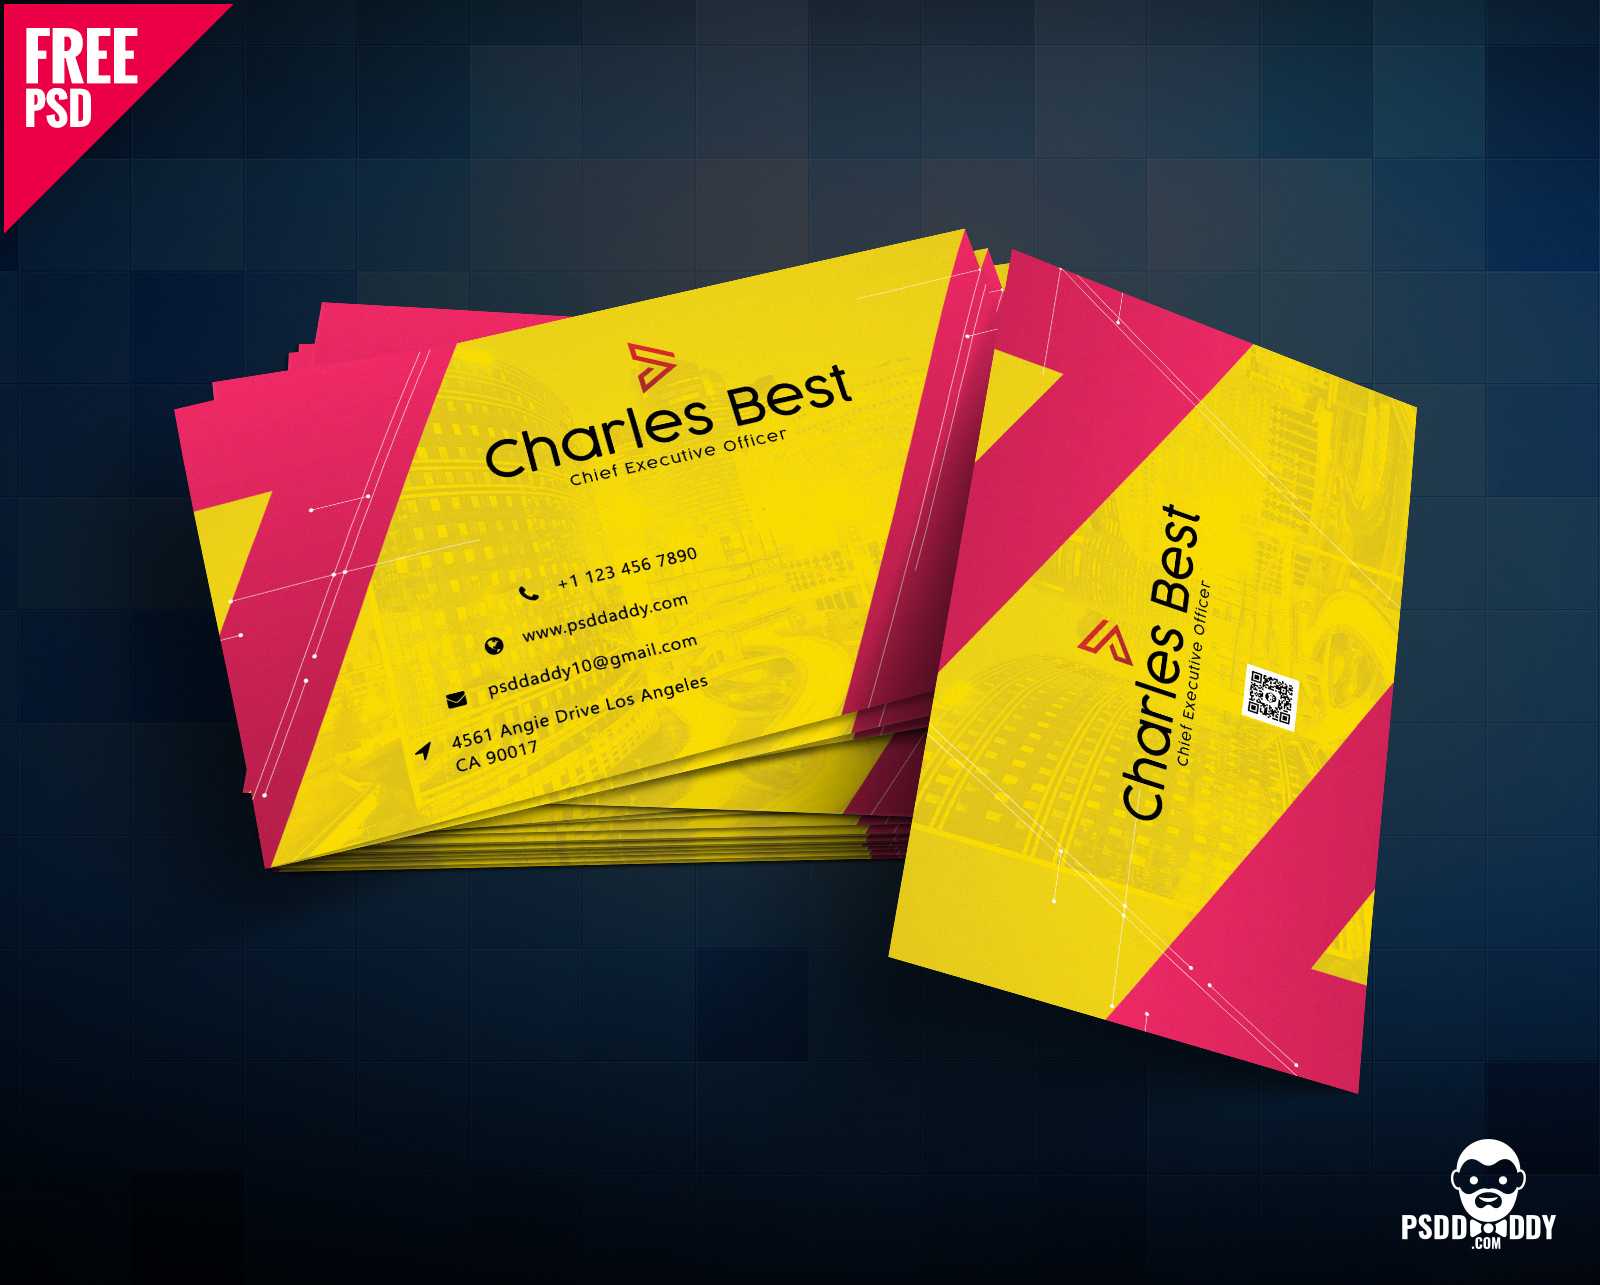 Download] Creative Business Card Free Psd | Psddaddy Inside Business Card Size Template Photoshop